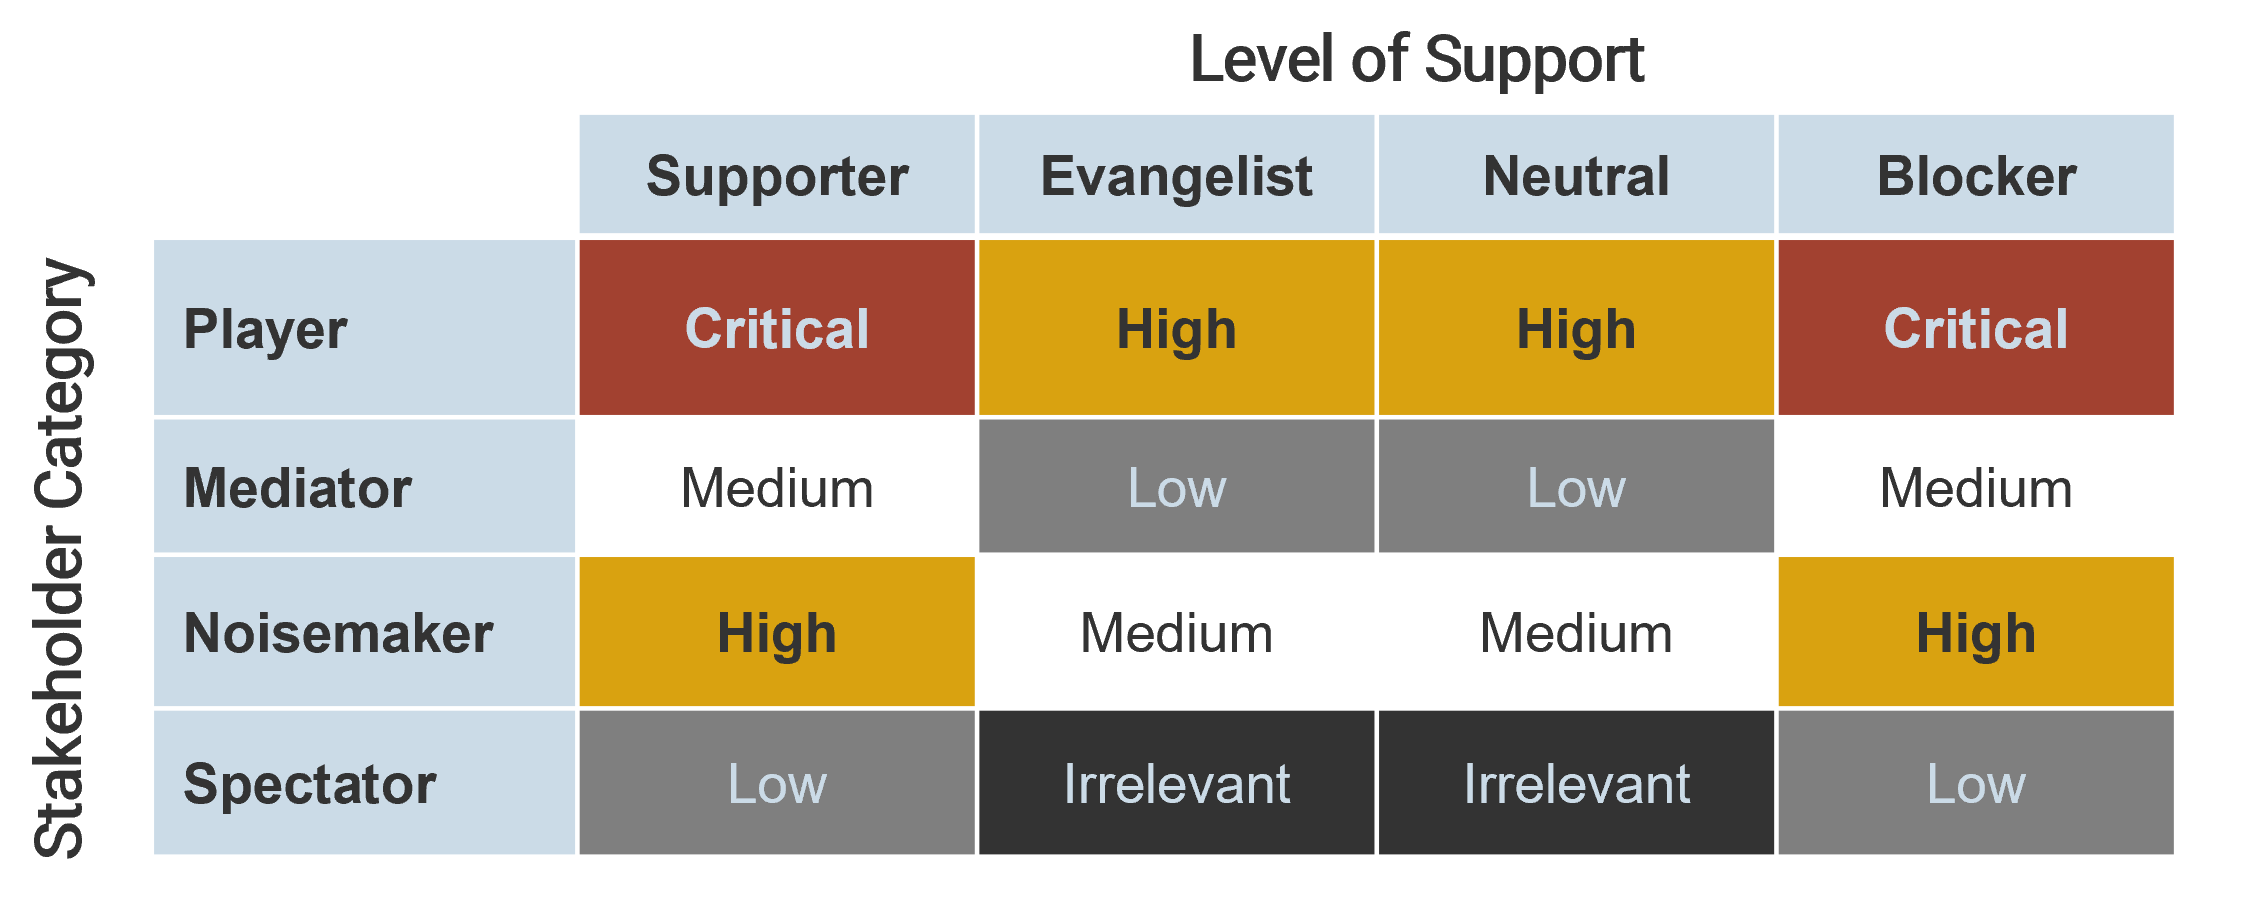 Table with 'Stakeholder Categories' and their 'Level of Support' for prioritizing. Support levels are 'Supporter', 'Evangelist', 'Neutral', and 'Blocker'.